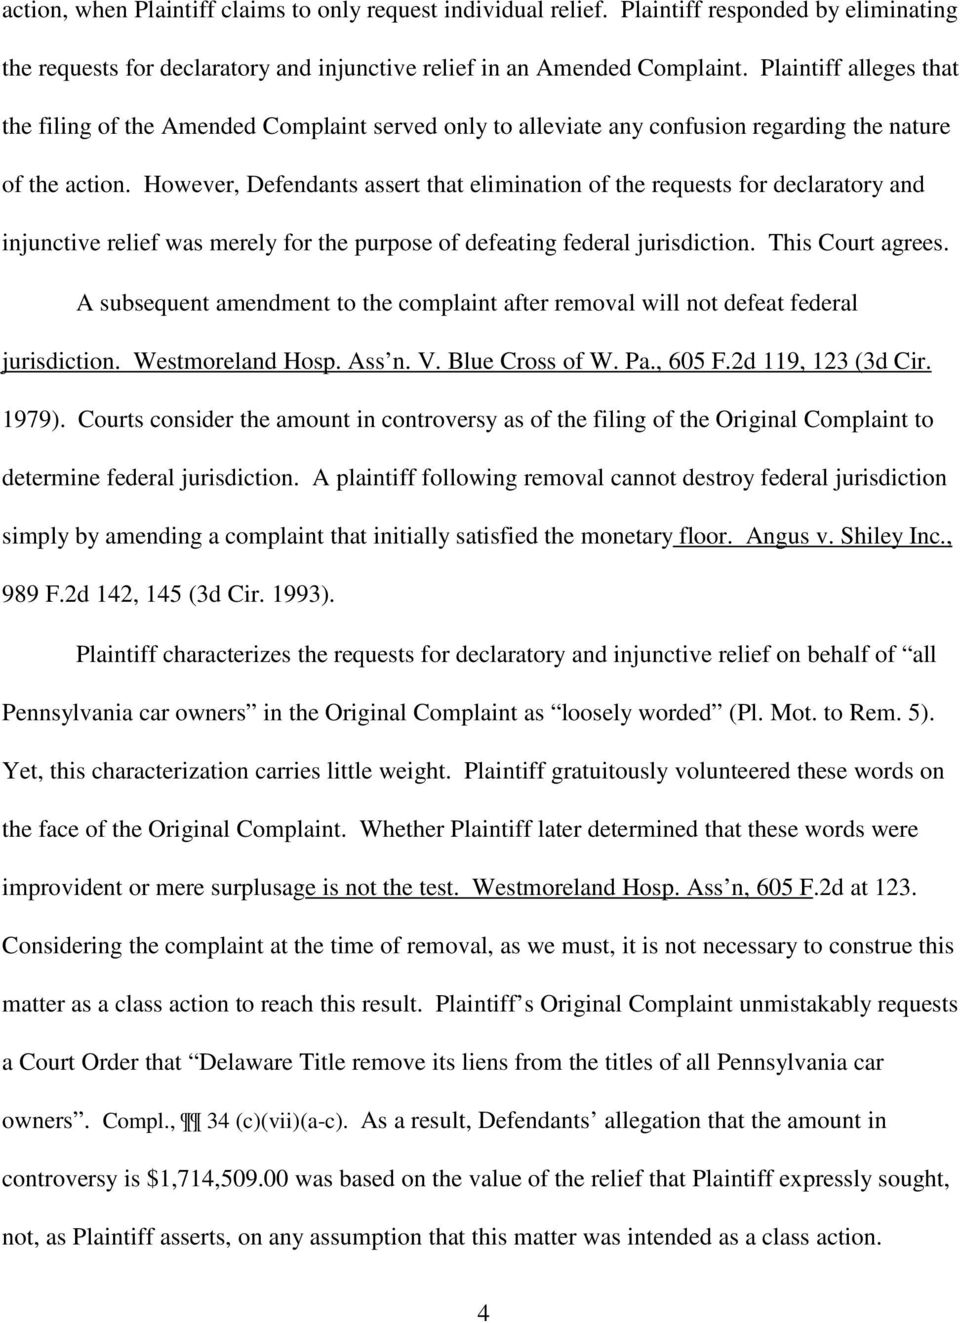 However, Defendants assert that elimination of the requests for declaratory and injunctive relief was merely for the purpose of defeating federal jurisdiction. This Court agrees.